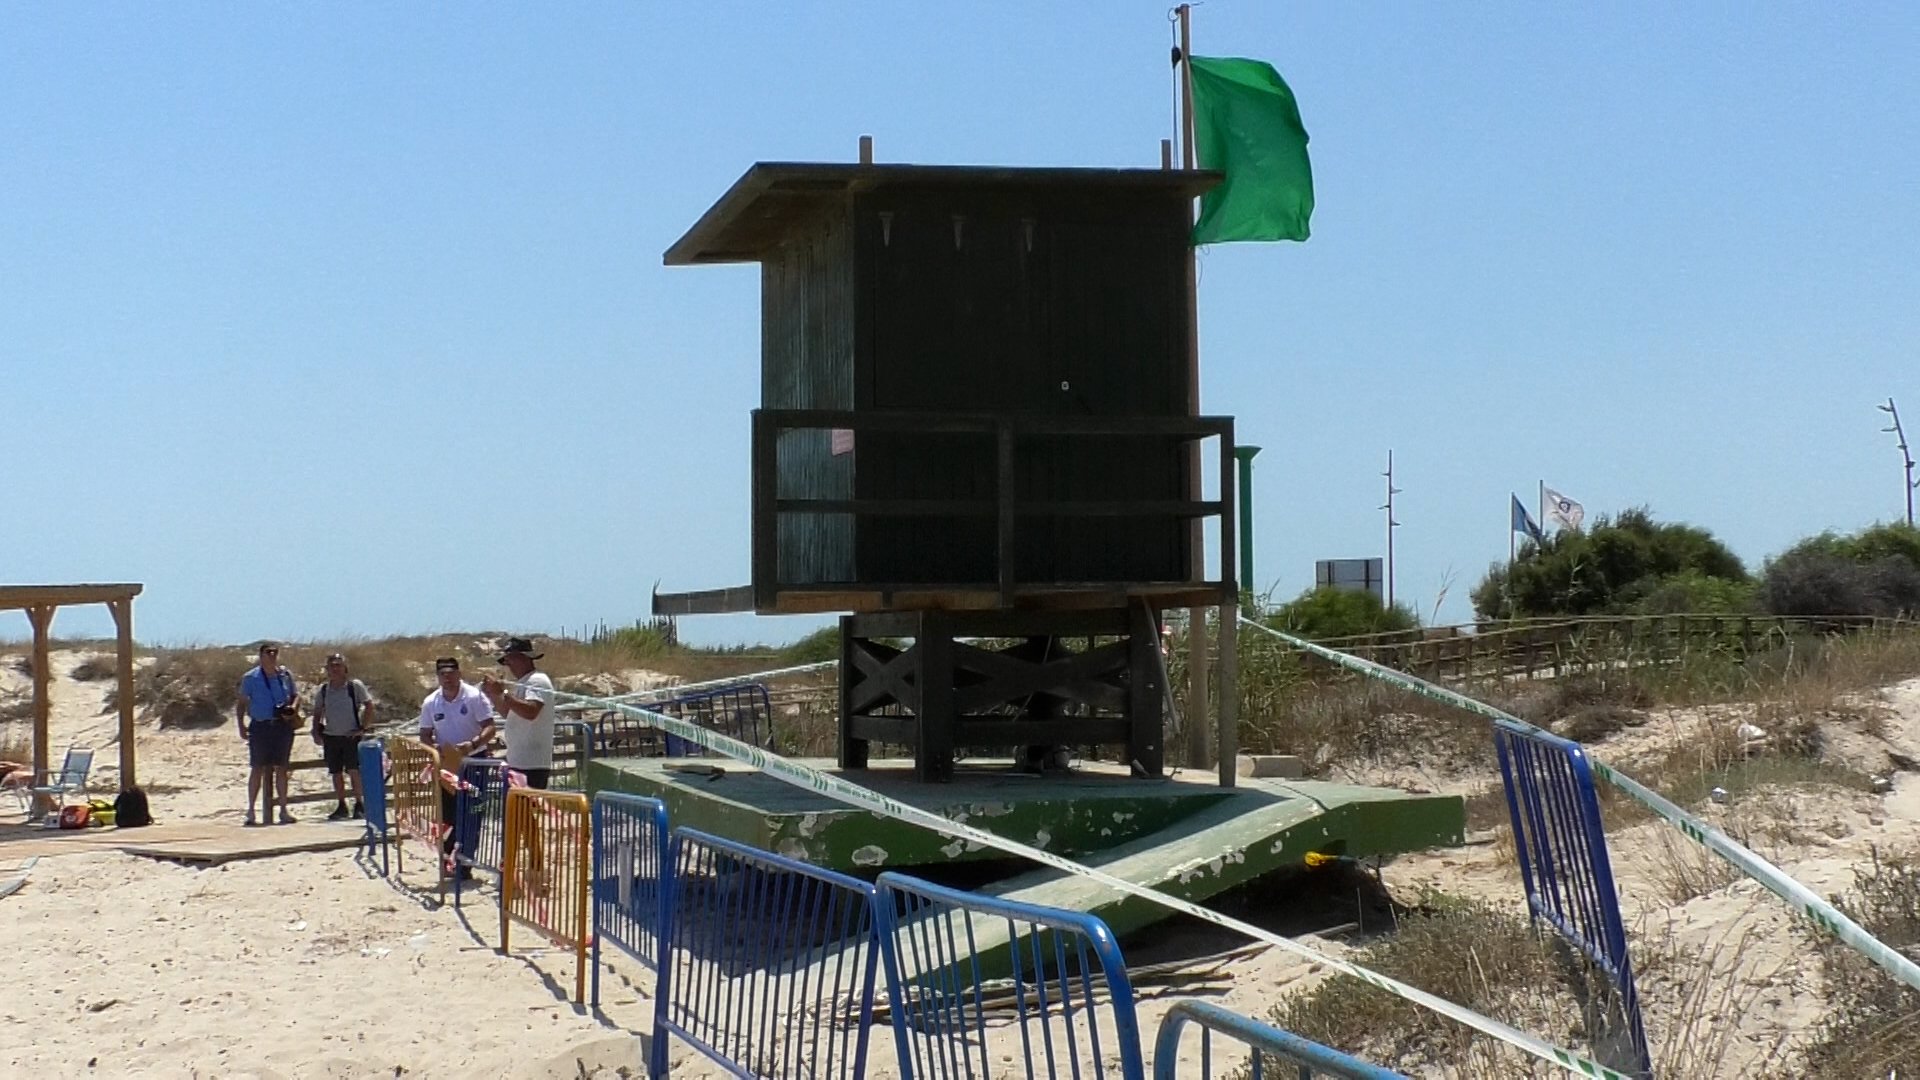 Teenager Dies On Mar Menor Beach In Spain After Lifeguard Watchtower Partially Collapses